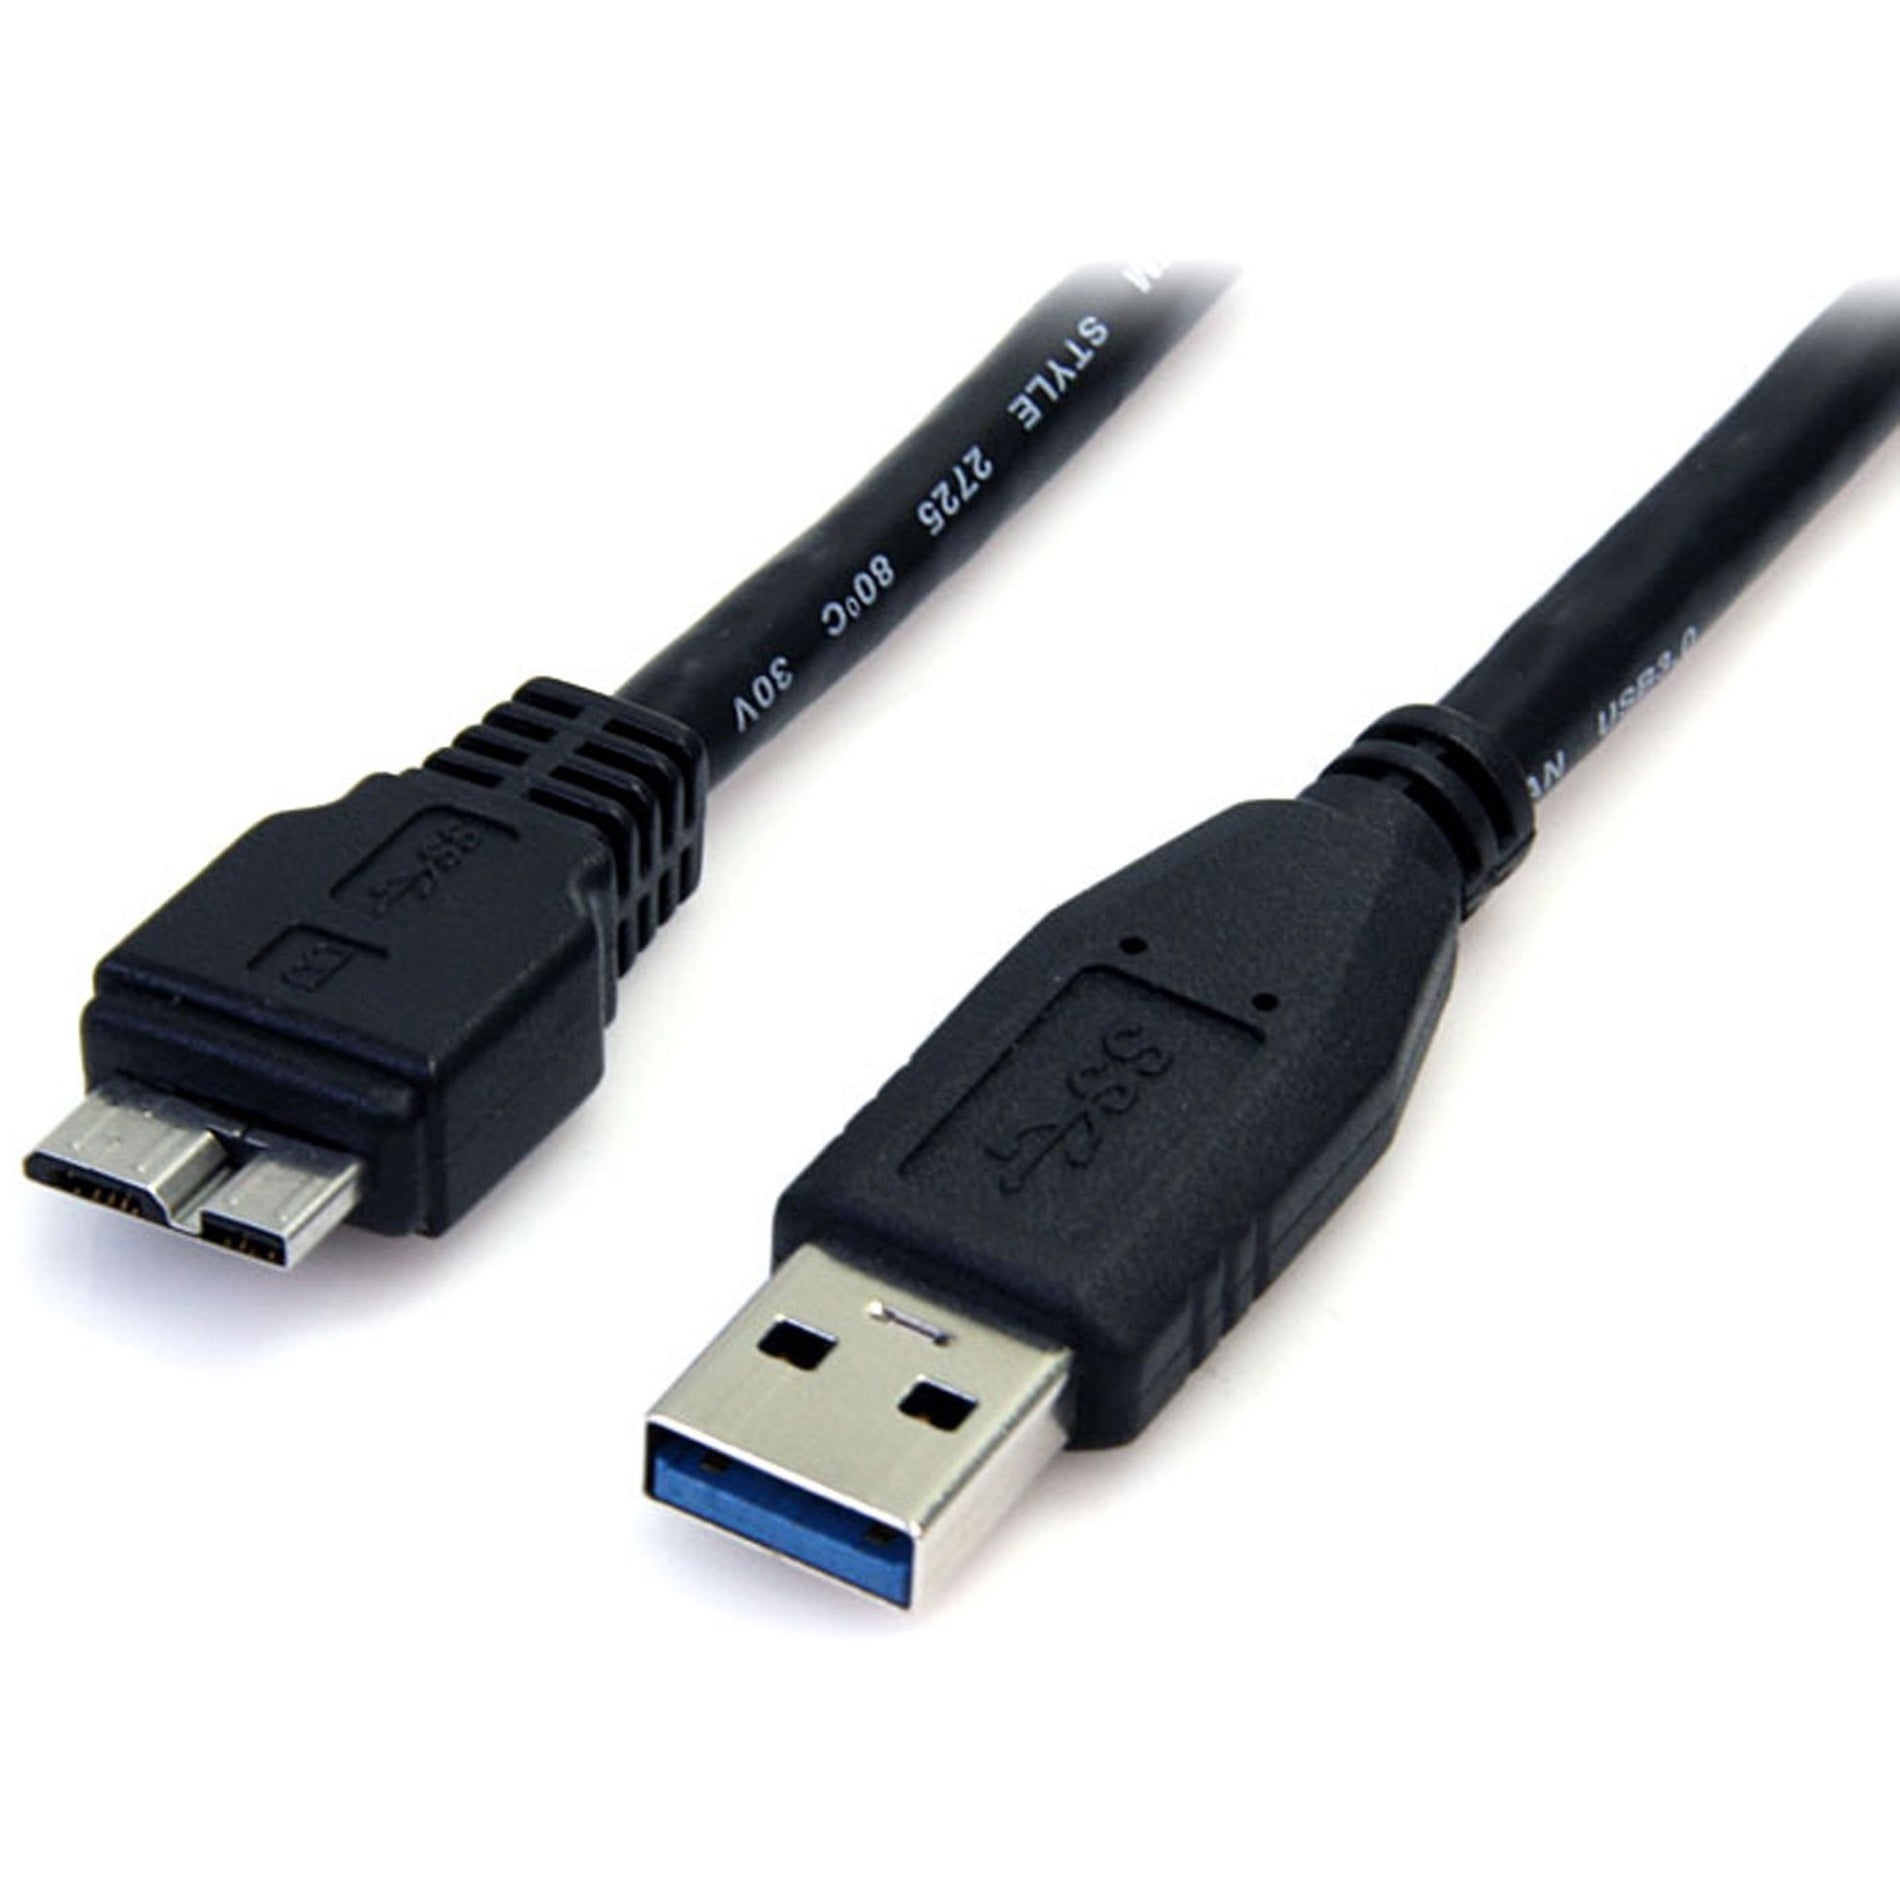 StarTech.com USB3AUB50CMB 0.5m (1.5ft) Black SuperSpeed USB 3.0 Cable A to Micro B - M/M, Fast Data Transfer, Lifetime Warranty